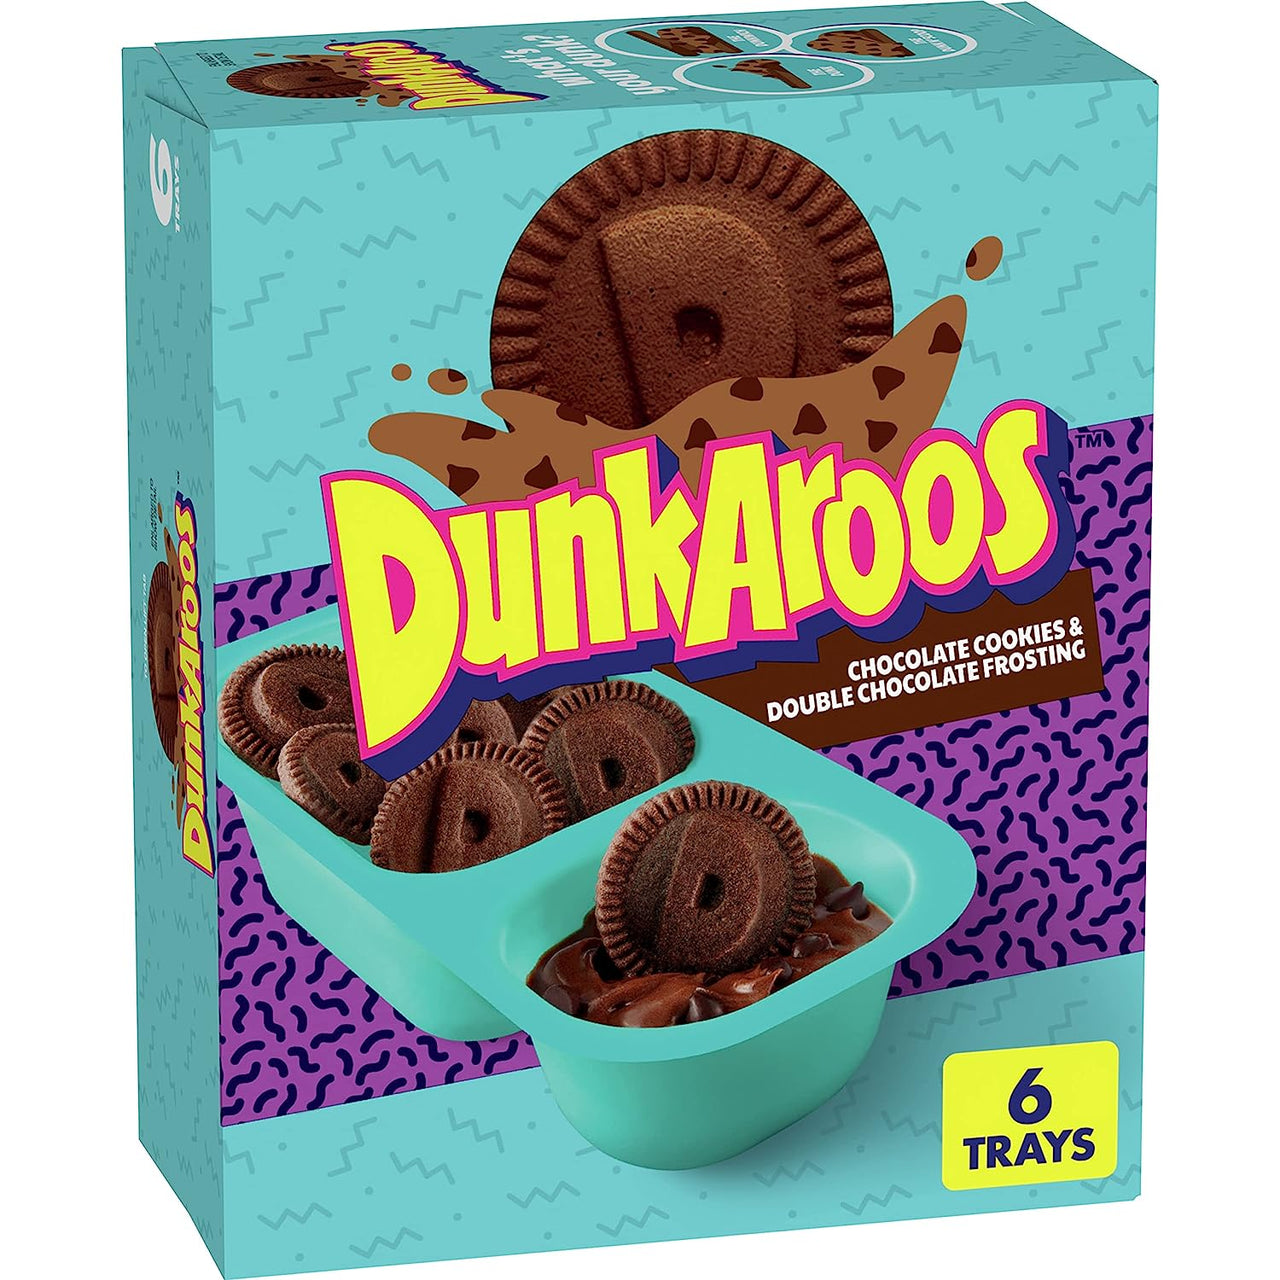 Dunkaroos Chocolate Cookies & Double Chocolate Frosting